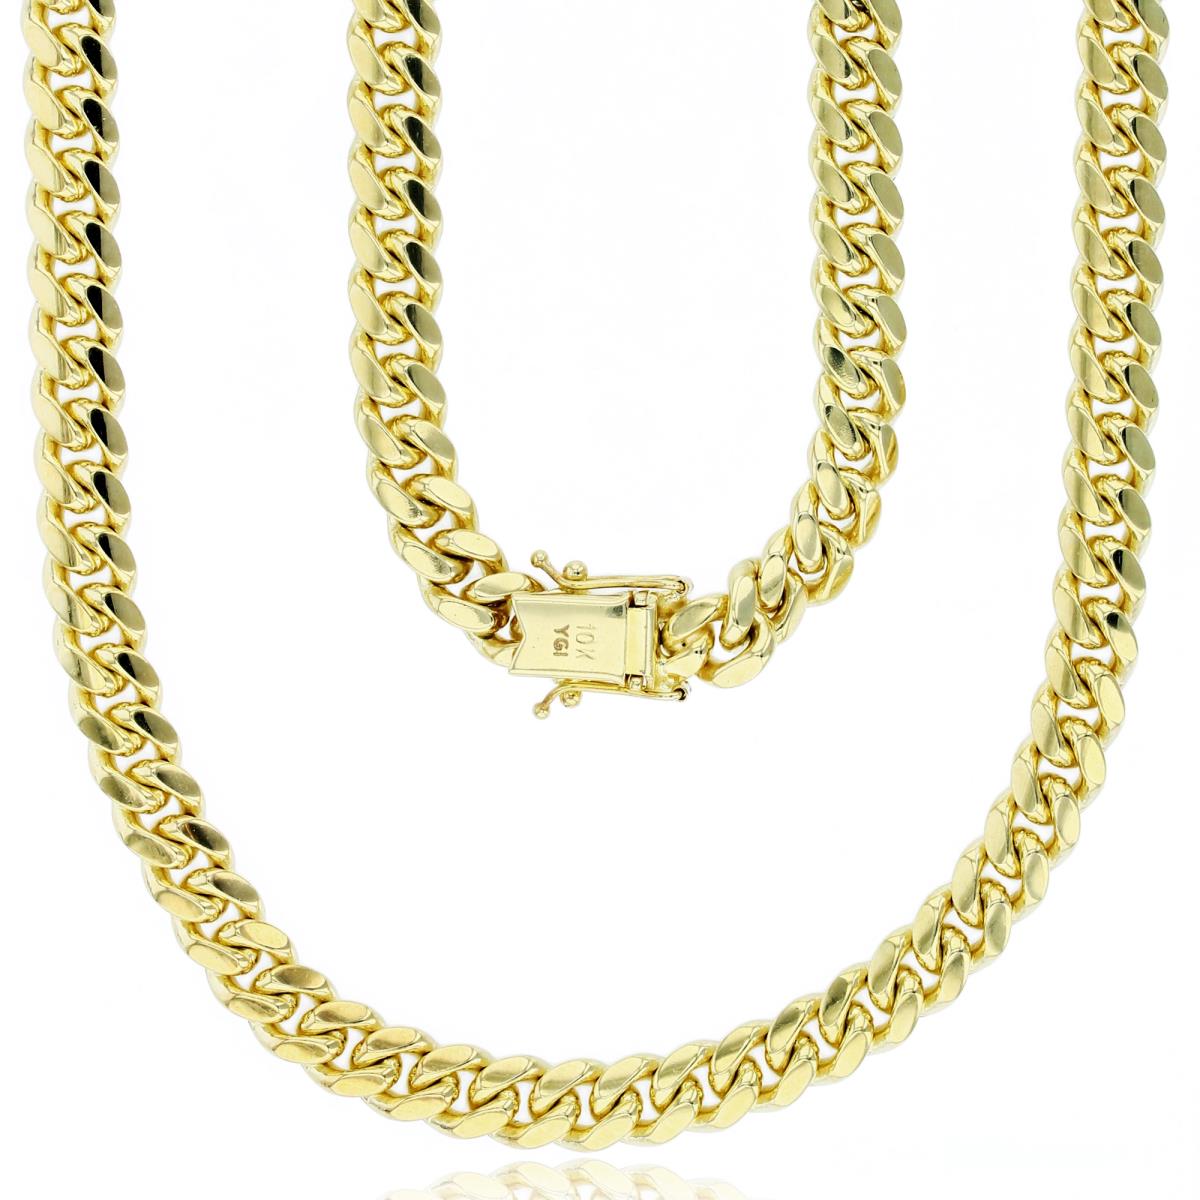 10K Yellow Gold 7mm 24" 210 Solid Miami Cuban Chain with Box Lock